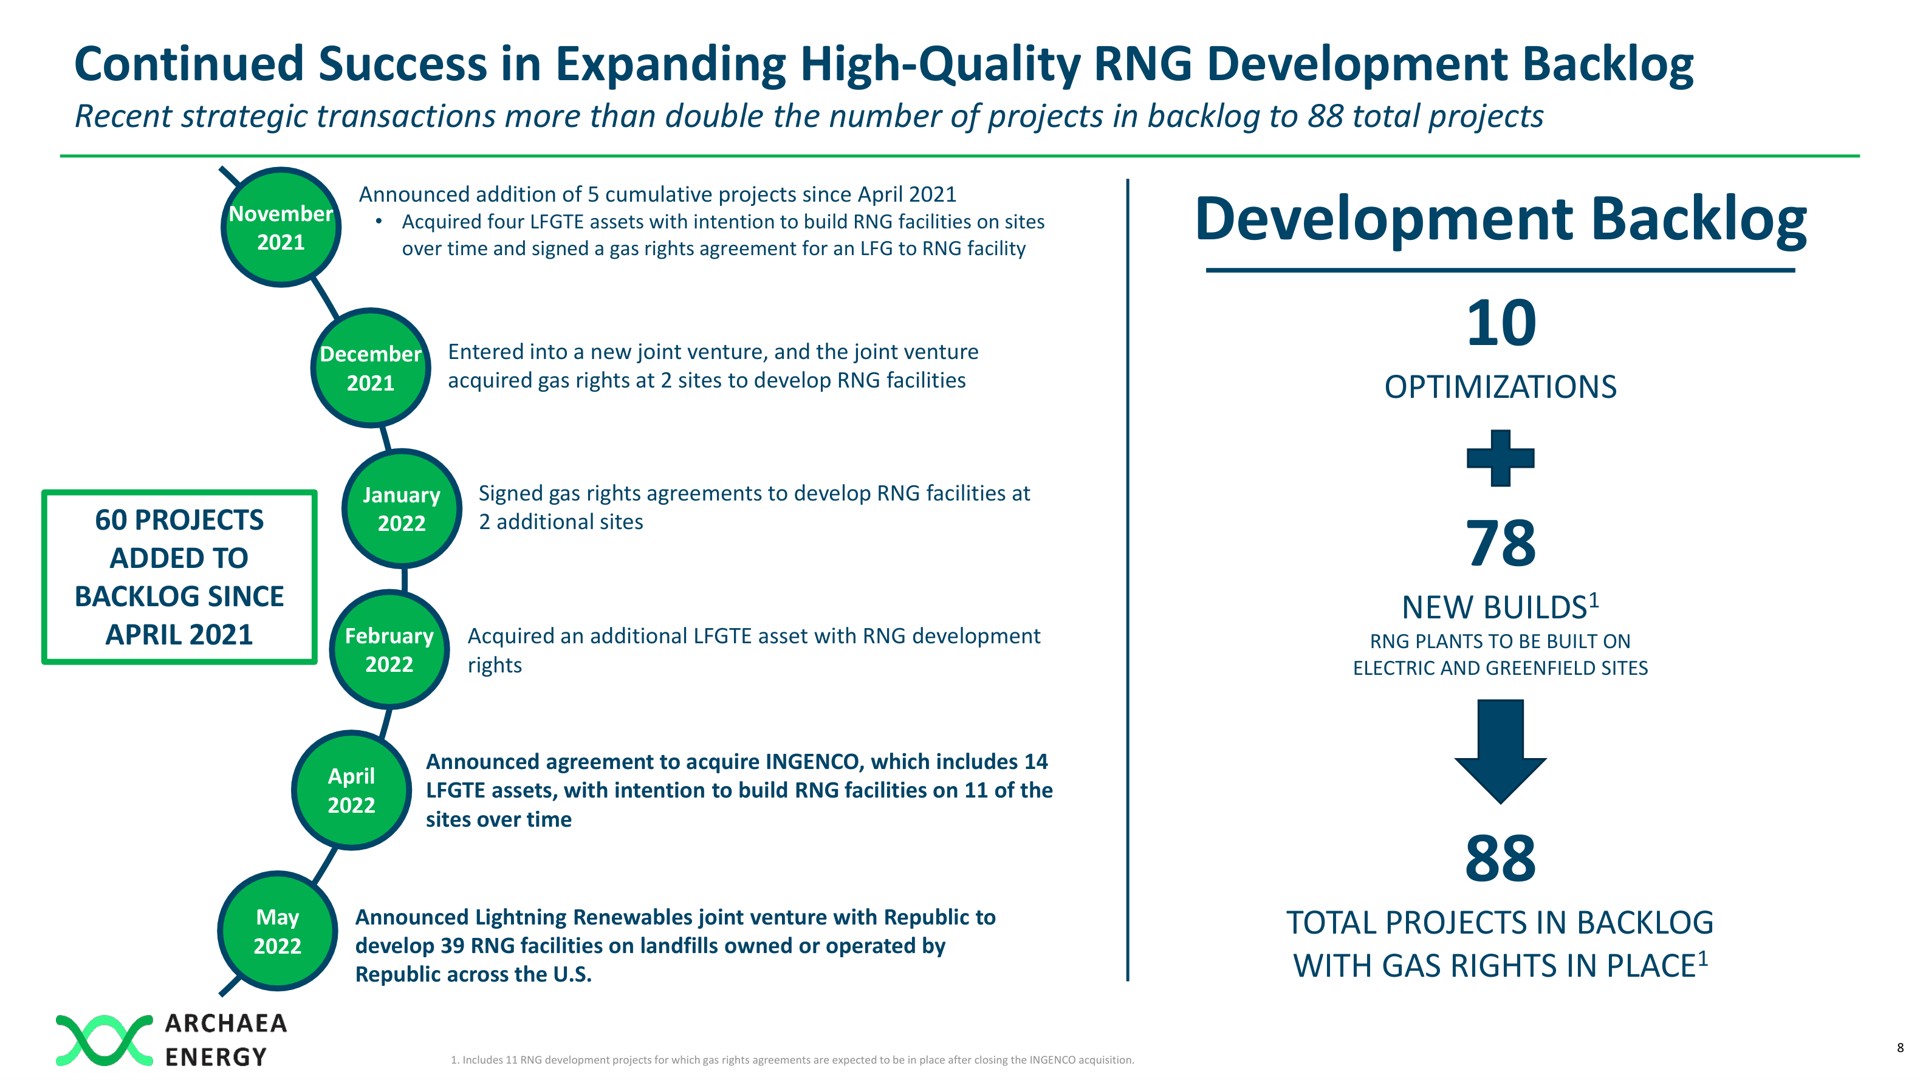 continued success in expanding high quality development backlog development backlog | Archaea Energy